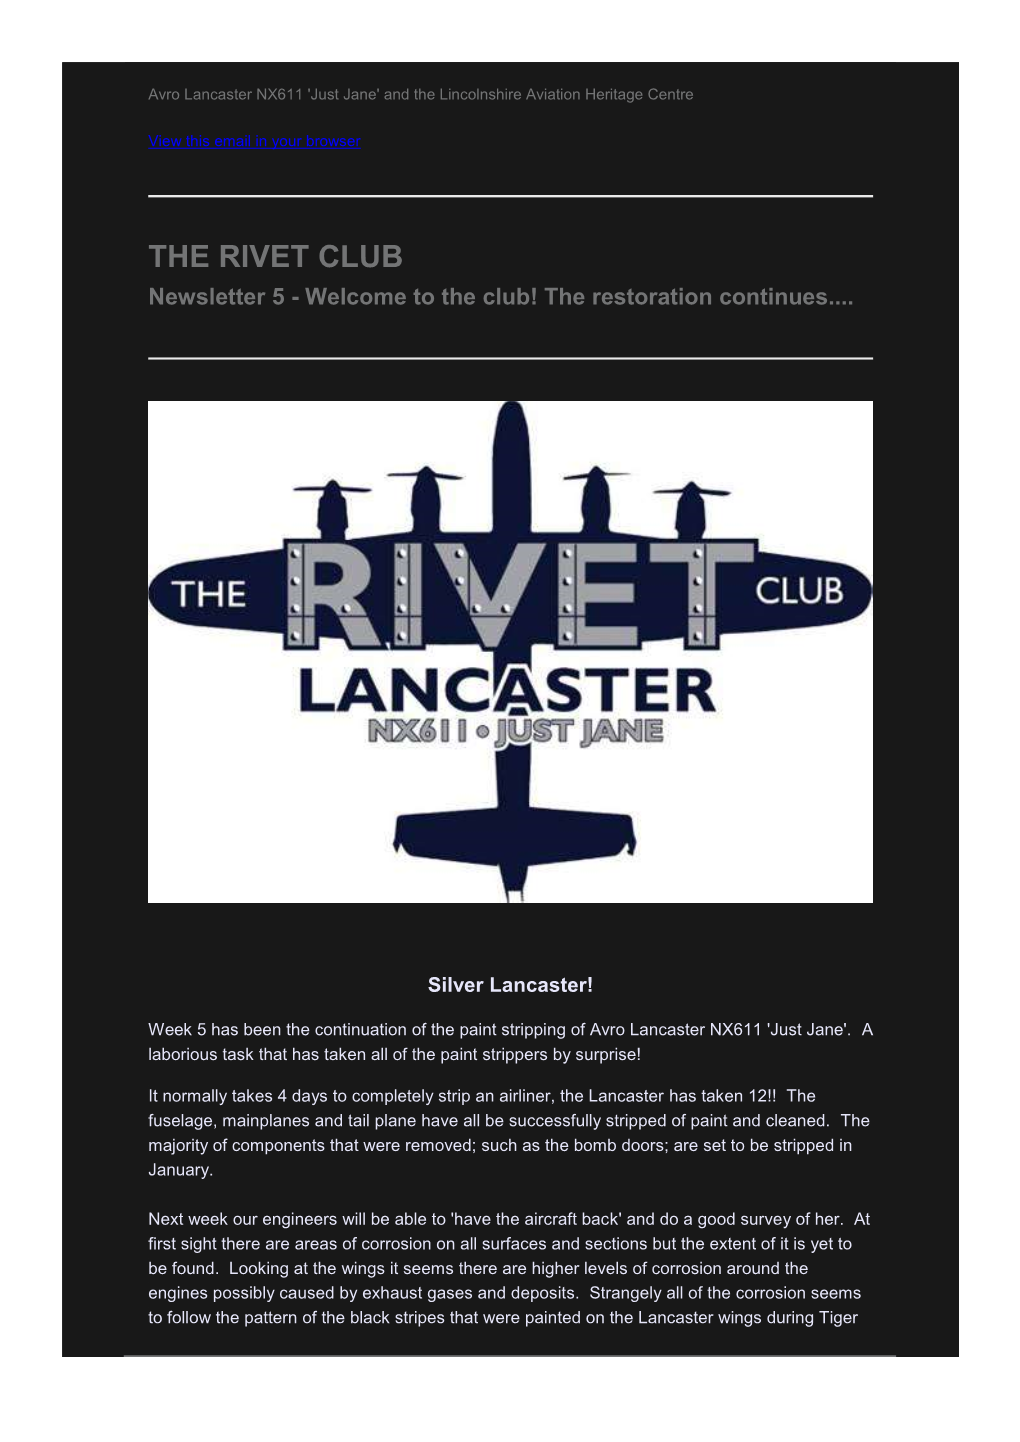 THE RIVET CLUB Newsletter 5 - Welcome to the Club! the Restoration Continues